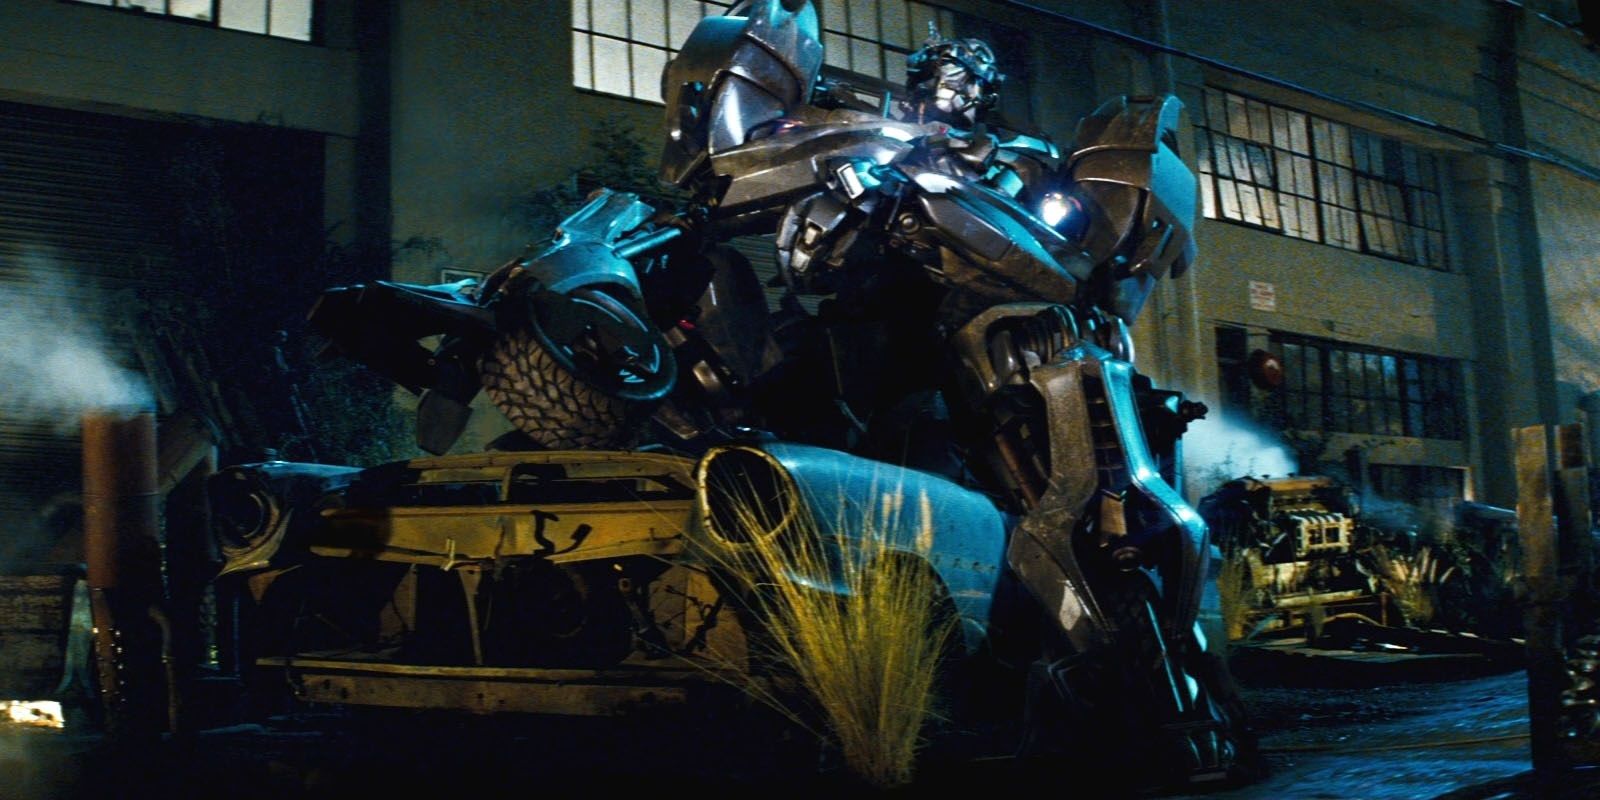 Jazz in transformers sitting on a car